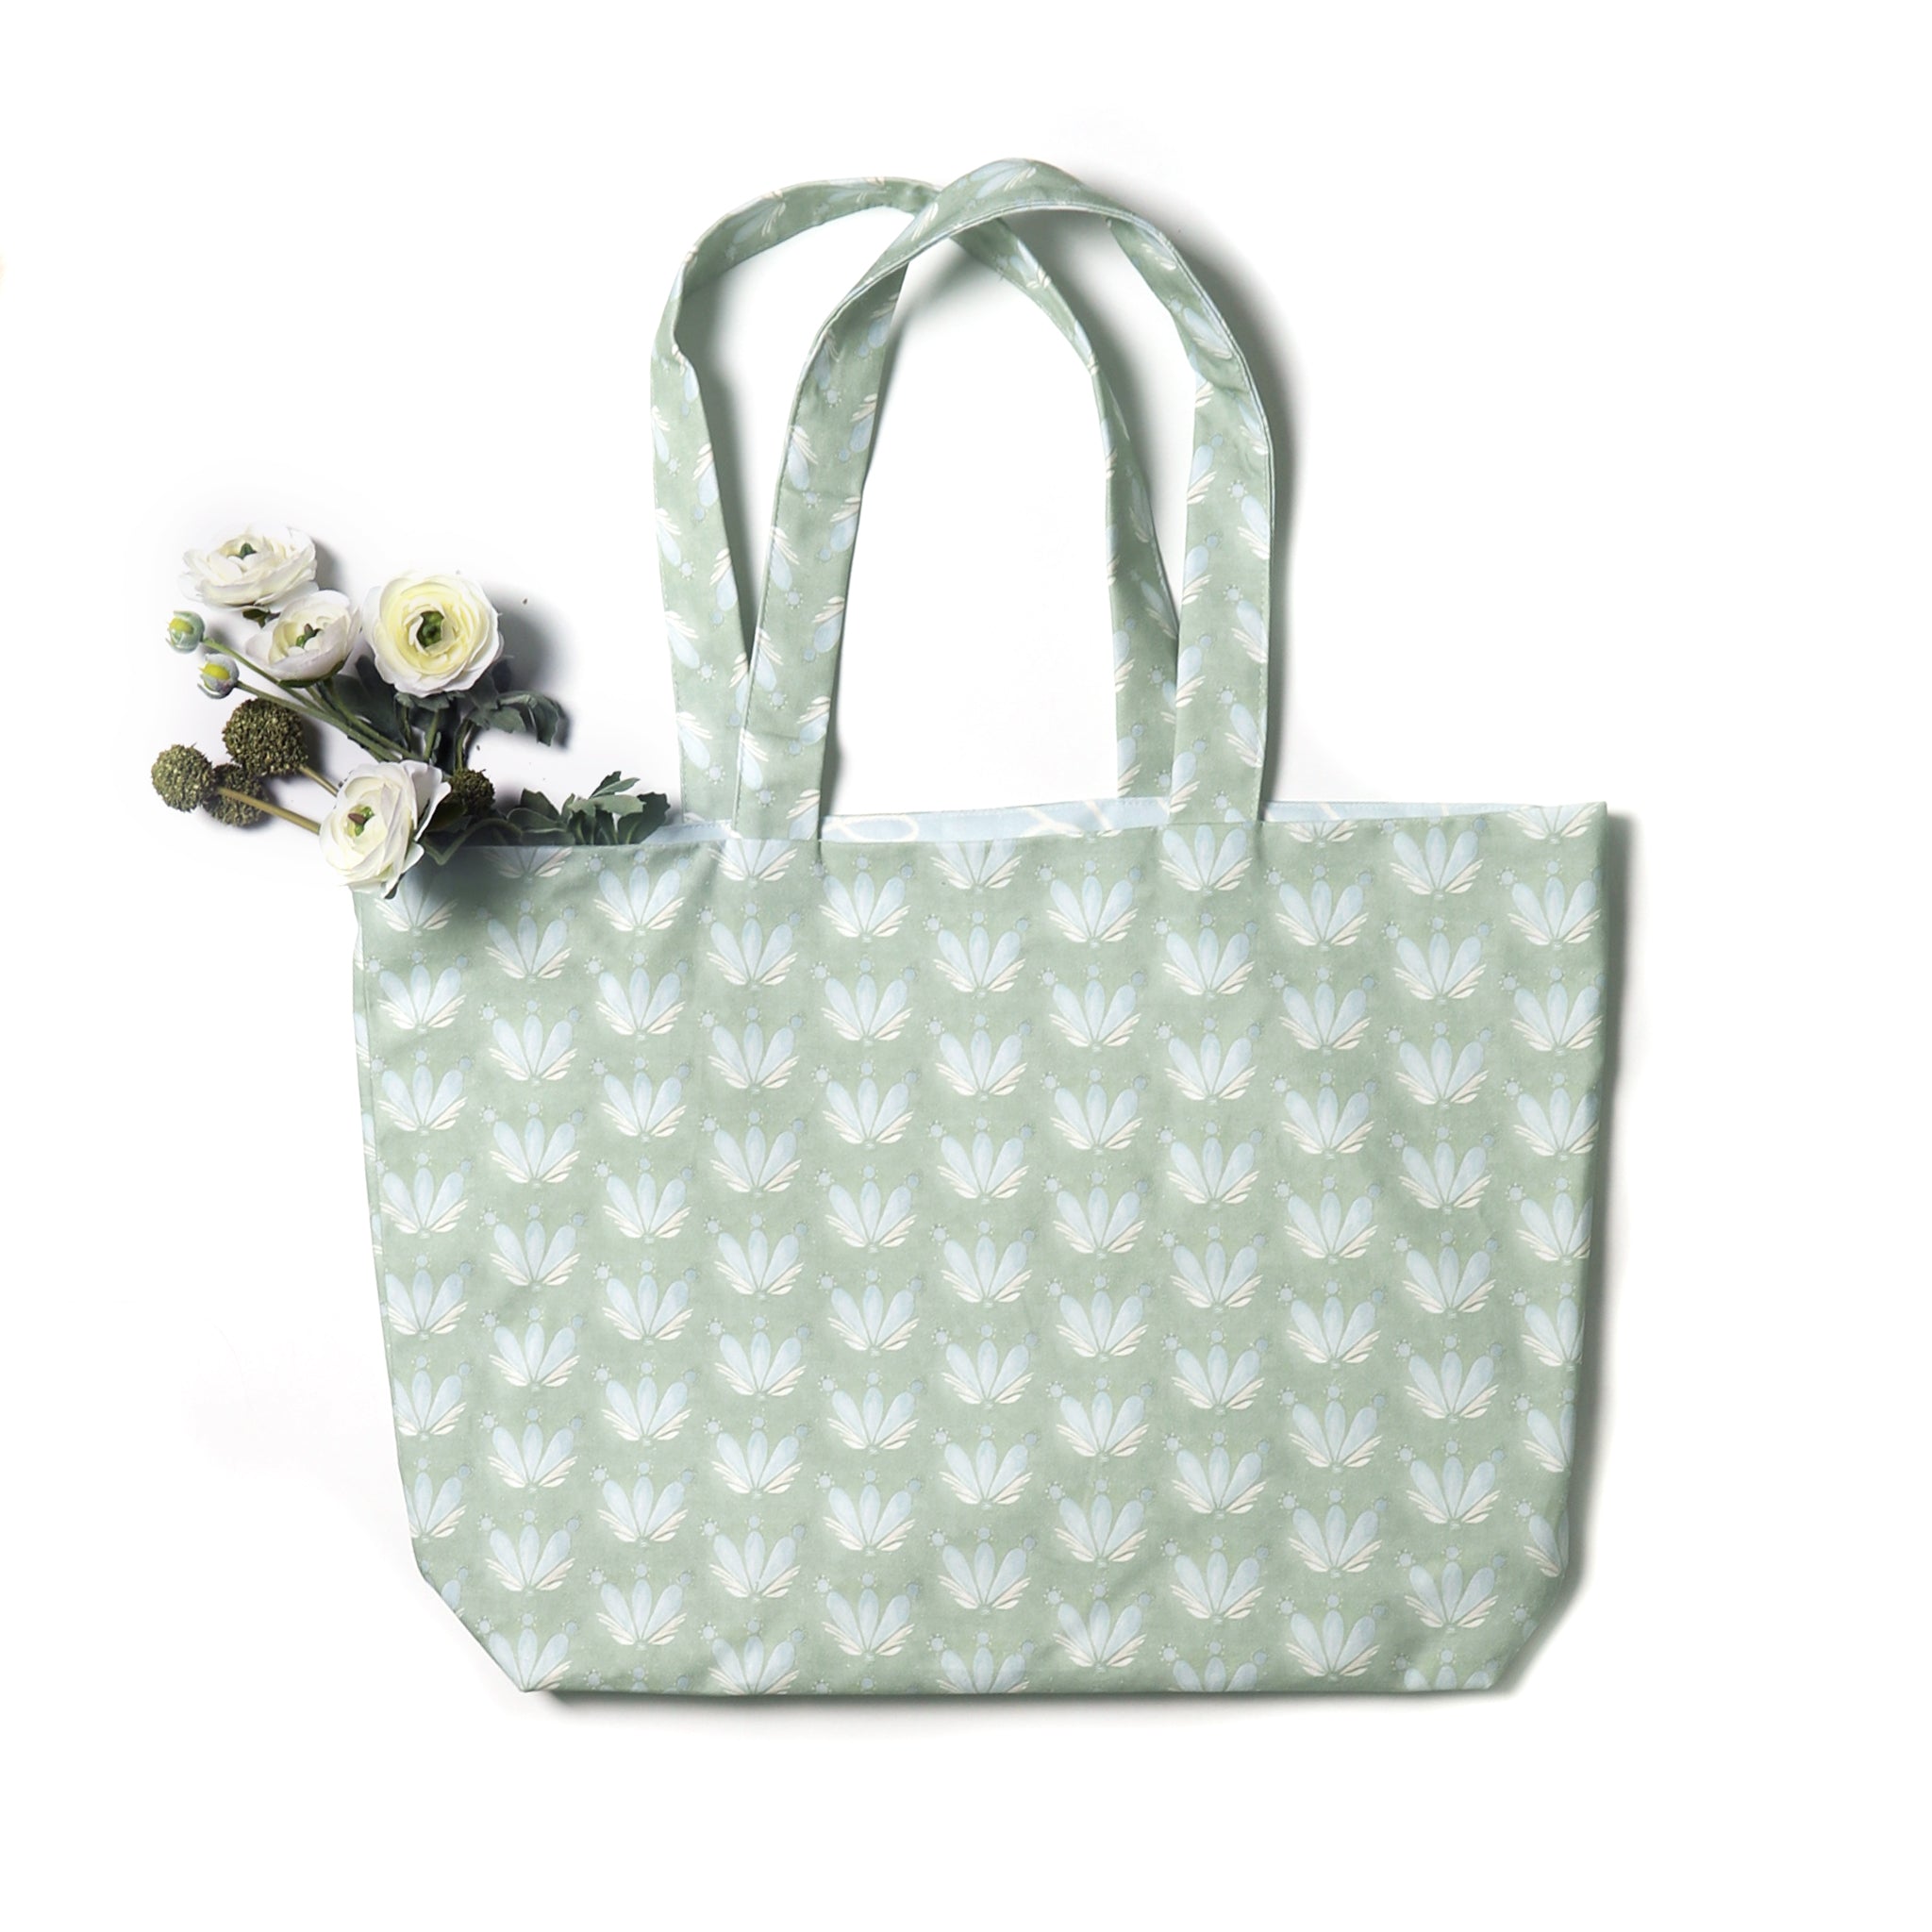 Blue & Green Floral Drop Repeat Printed Tote Bag with flowers inside